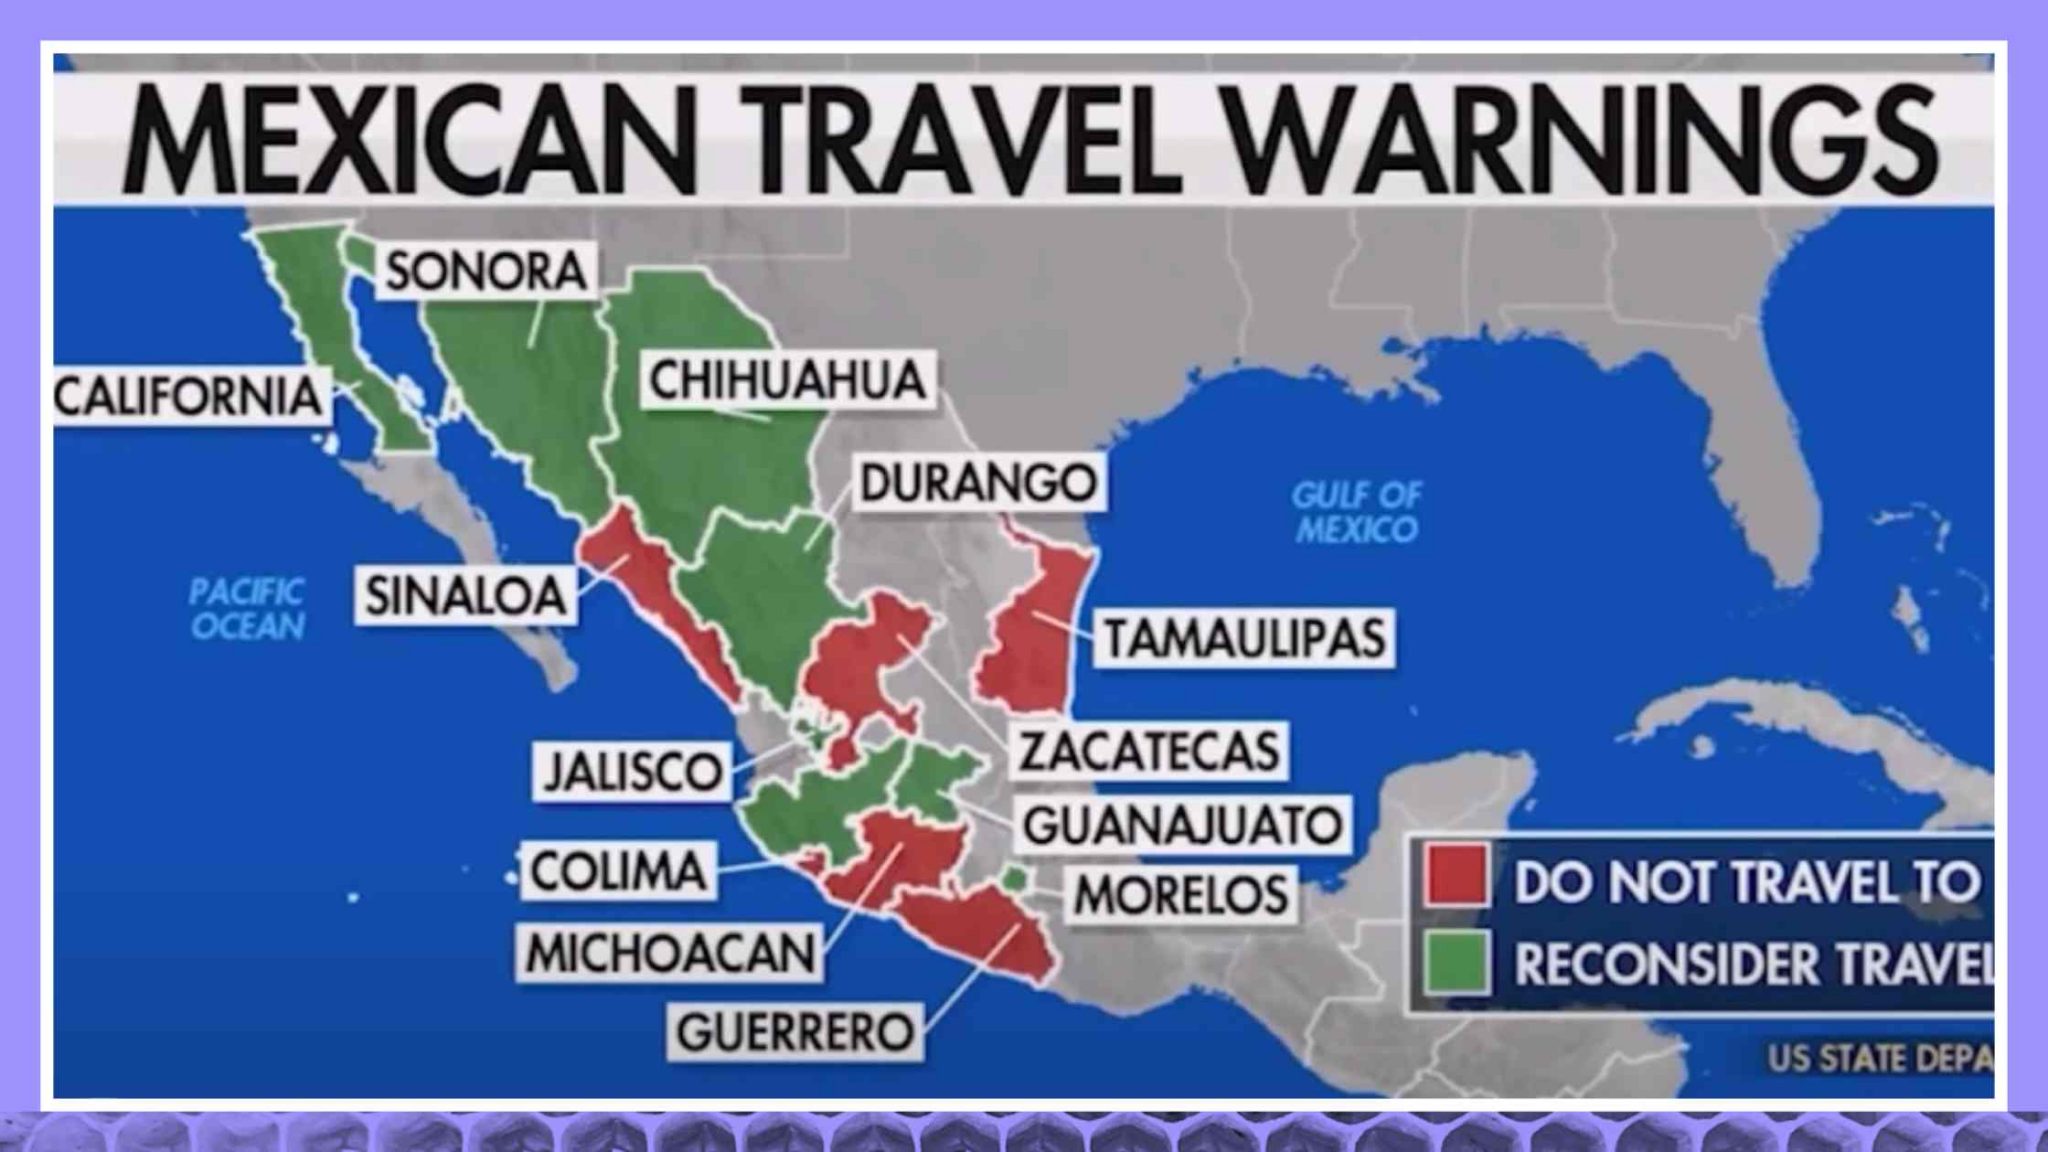 U.S. Officials Reissue 'Do Not Travel' Warning to Parts of Mexico After